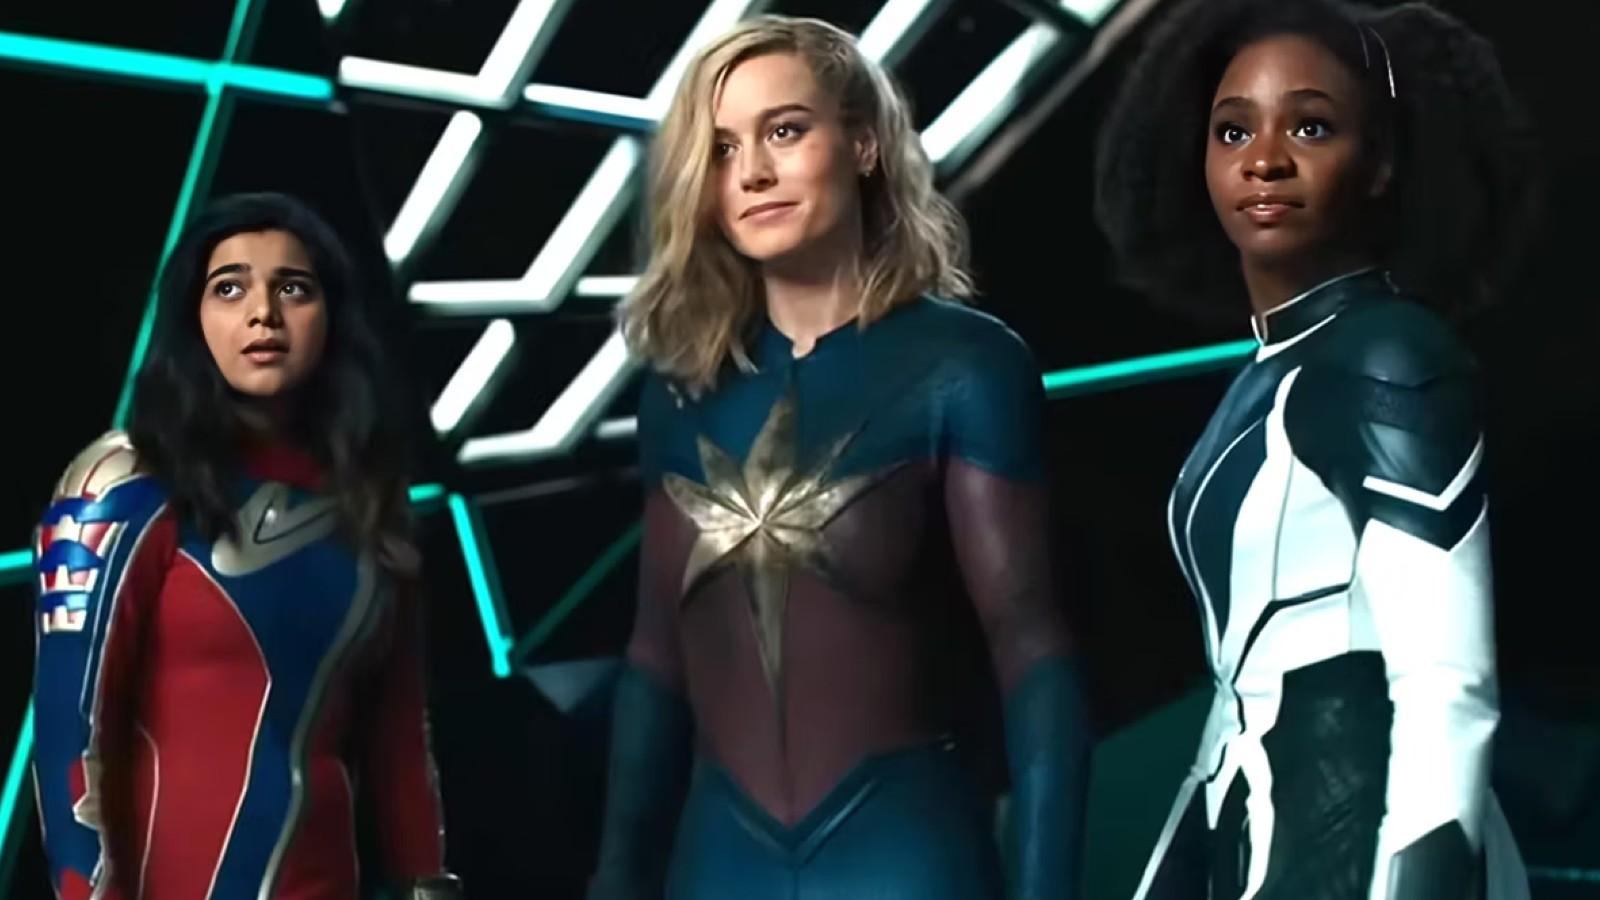 Ms. Marvel, Captain Marvel, and Monica Rambeau teaming up in The Marvels.